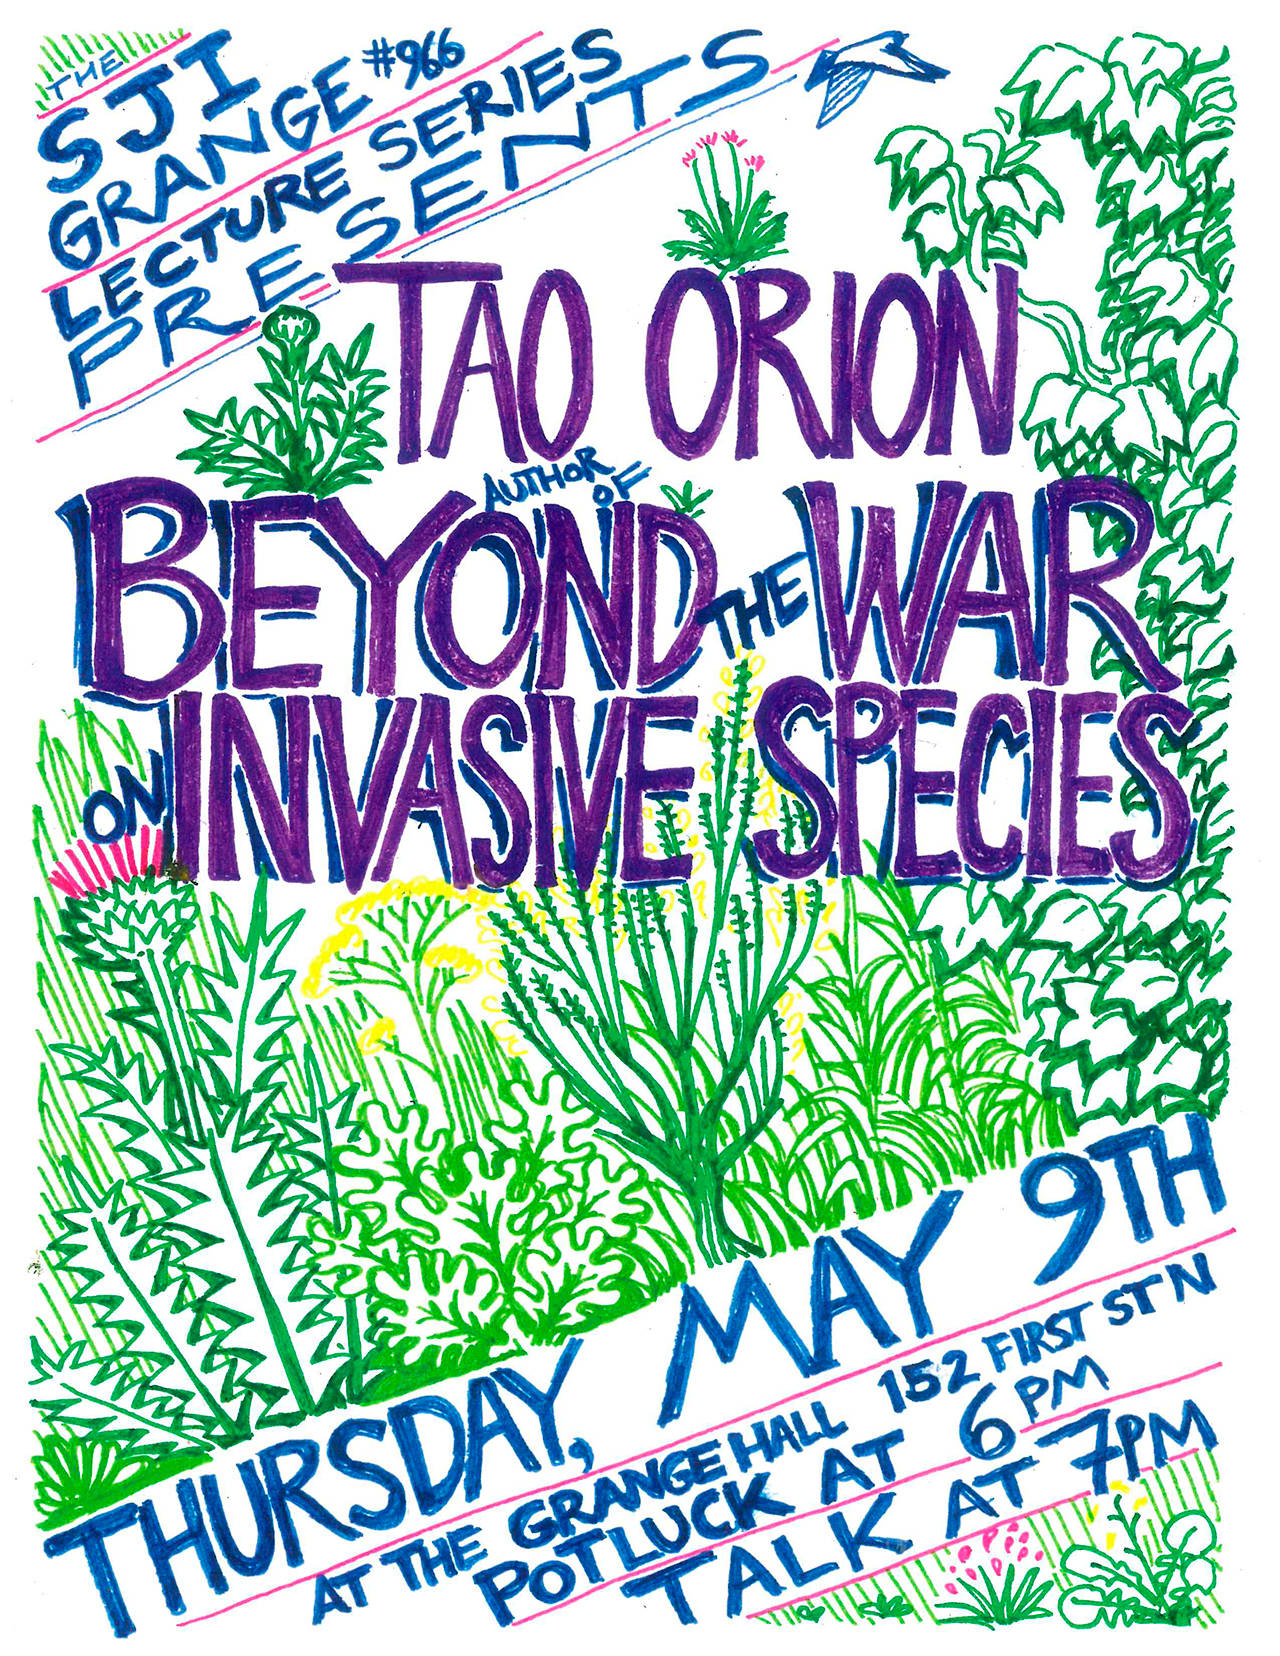 ‘Beyond the War on Invasive Species’ with author Tao Orion